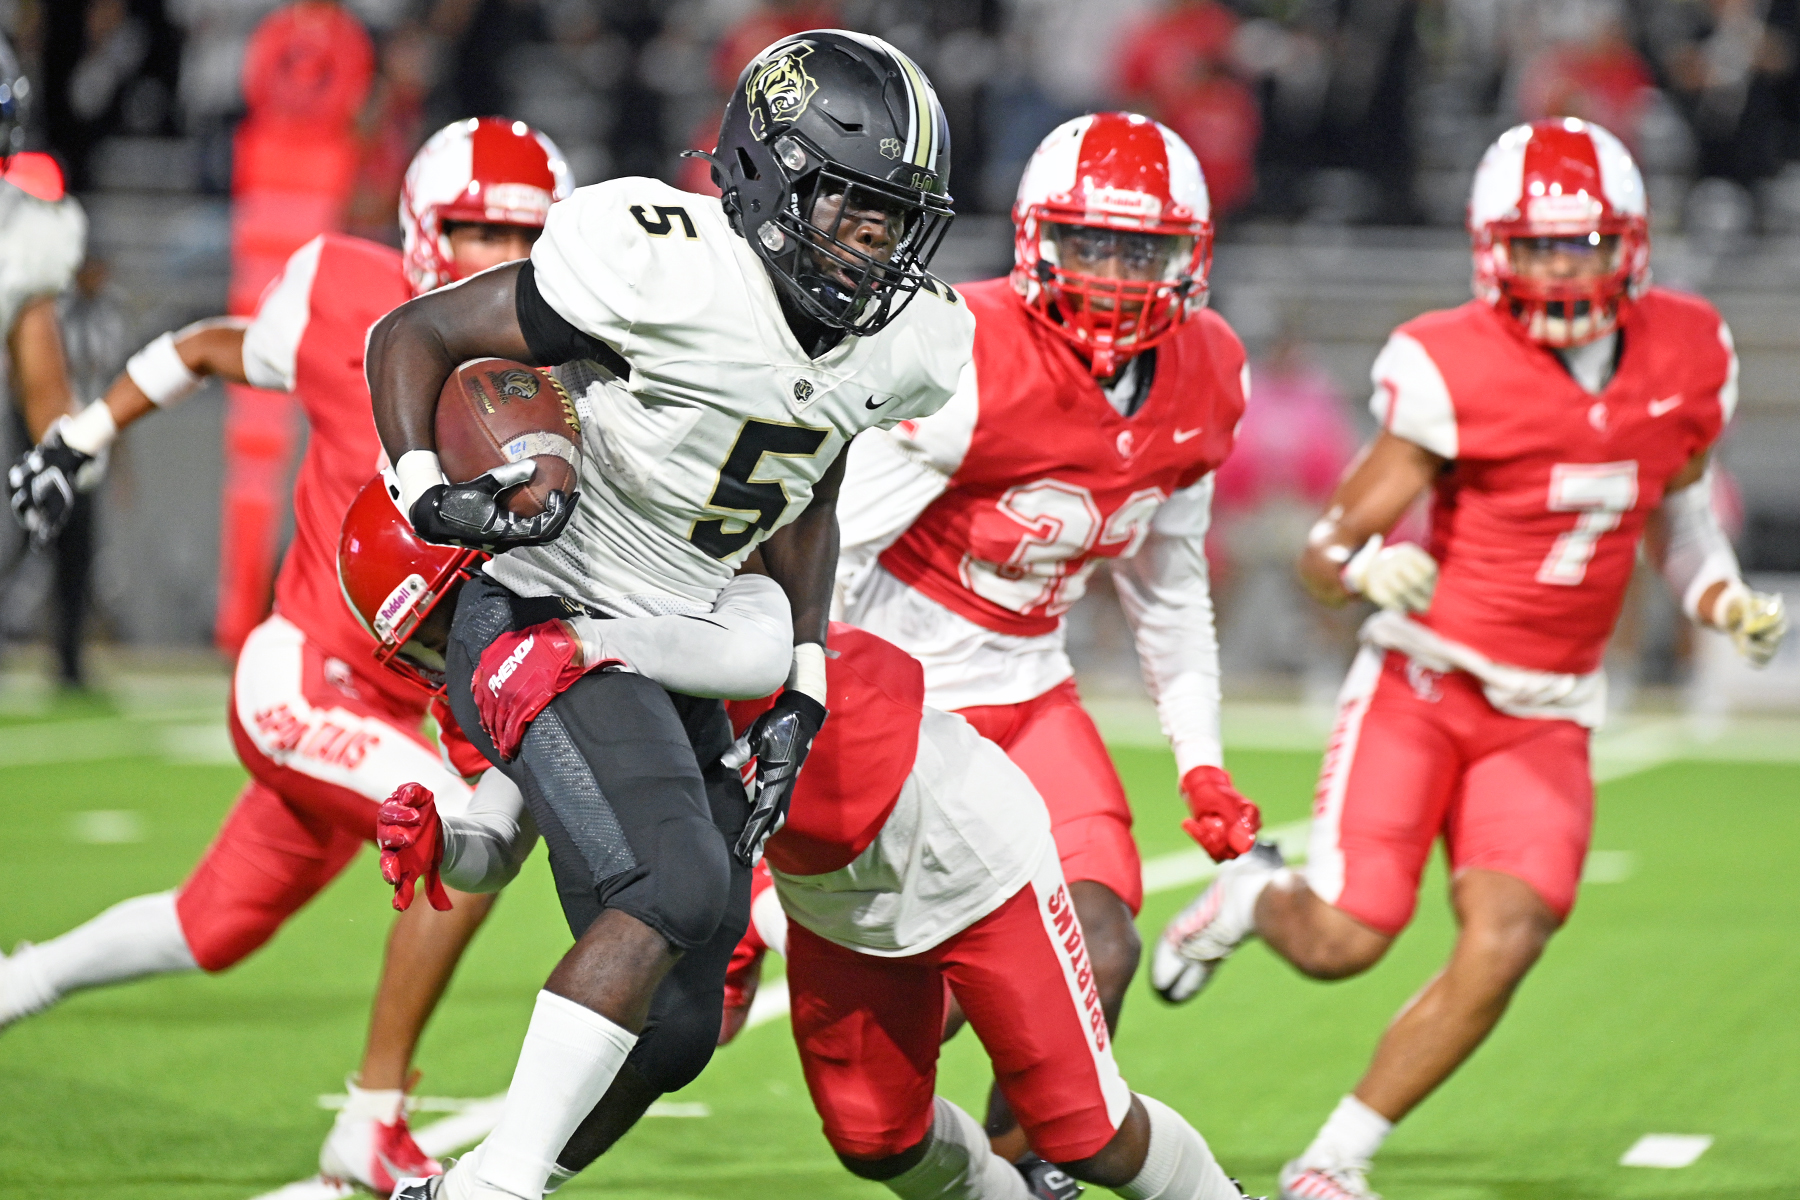 CFISD Football Players Named to 2022 All-District 16-6A Team